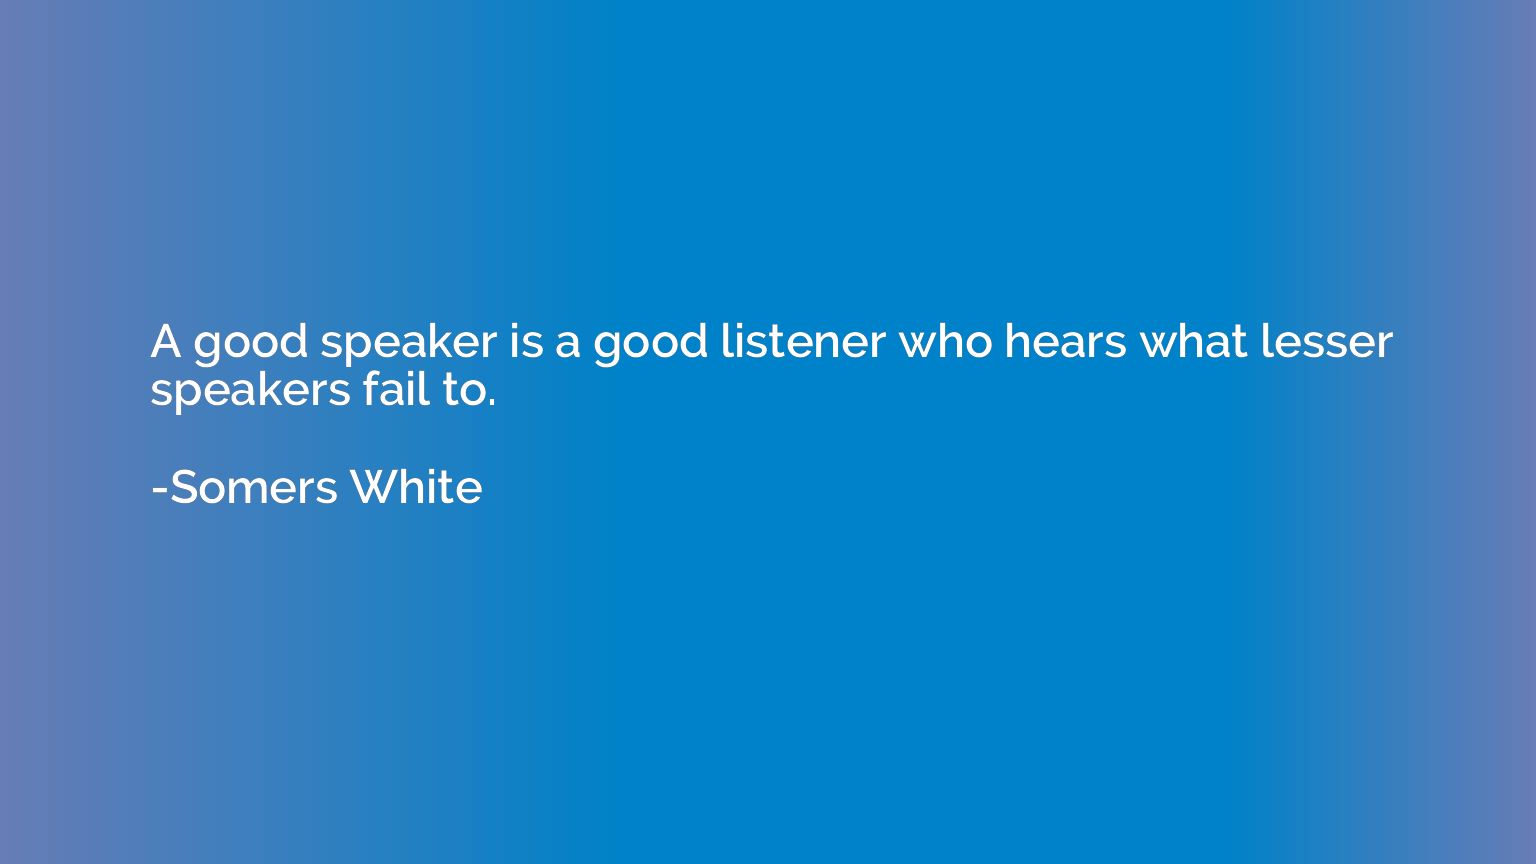 A good speaker is a good listener who hears what lesser spea